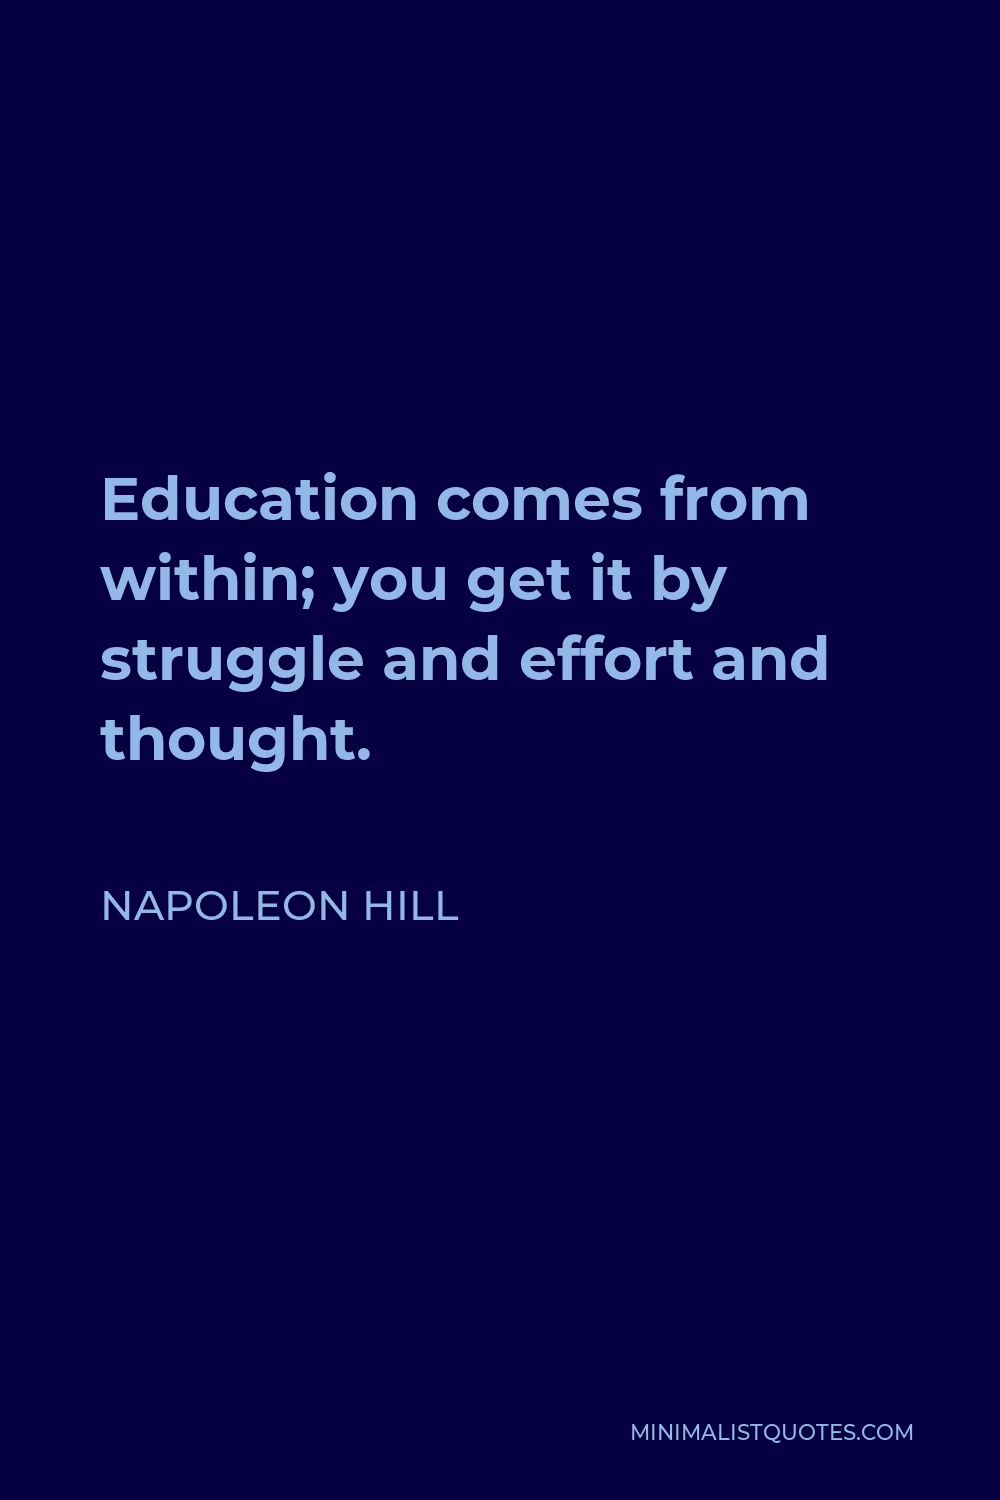 Napoleon Hill Quote - Education comes from within; you get it by struggle and effort and thought.